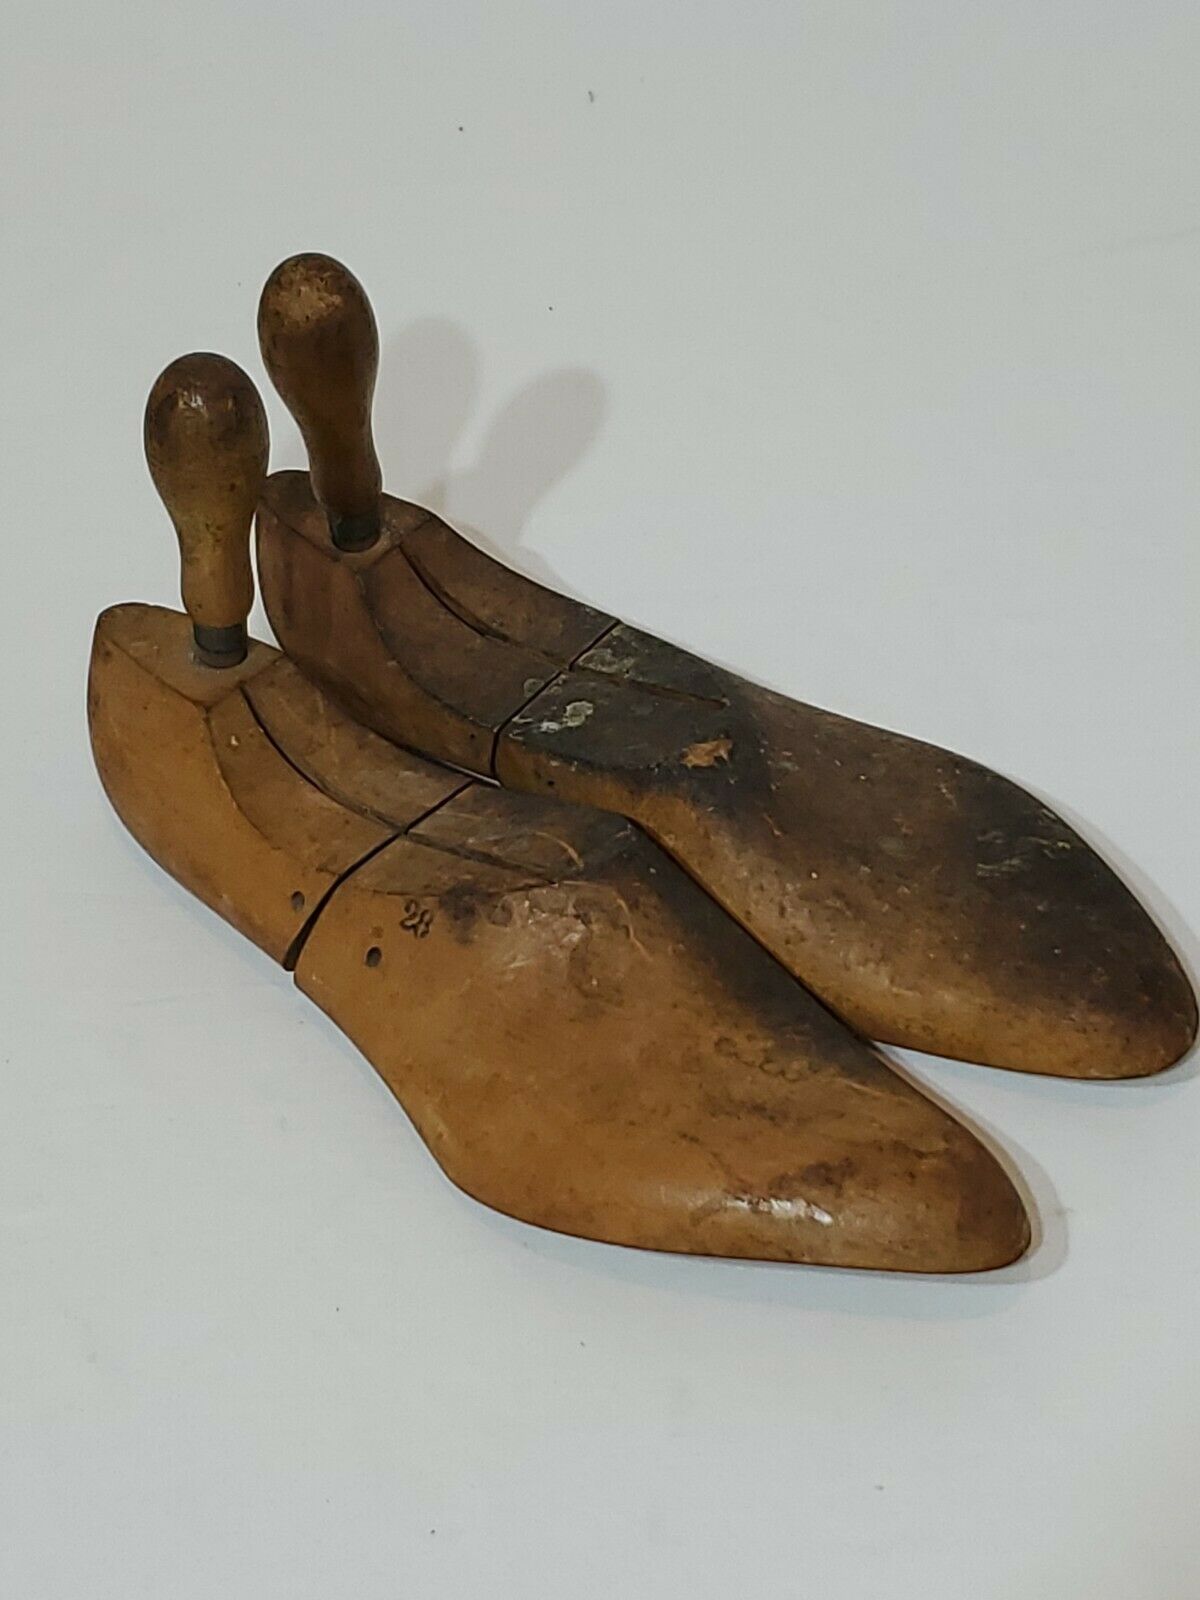 Antique Shoe Trees Forms Wooden Shoe Last Shoemakers  Stamped "83" Size 28